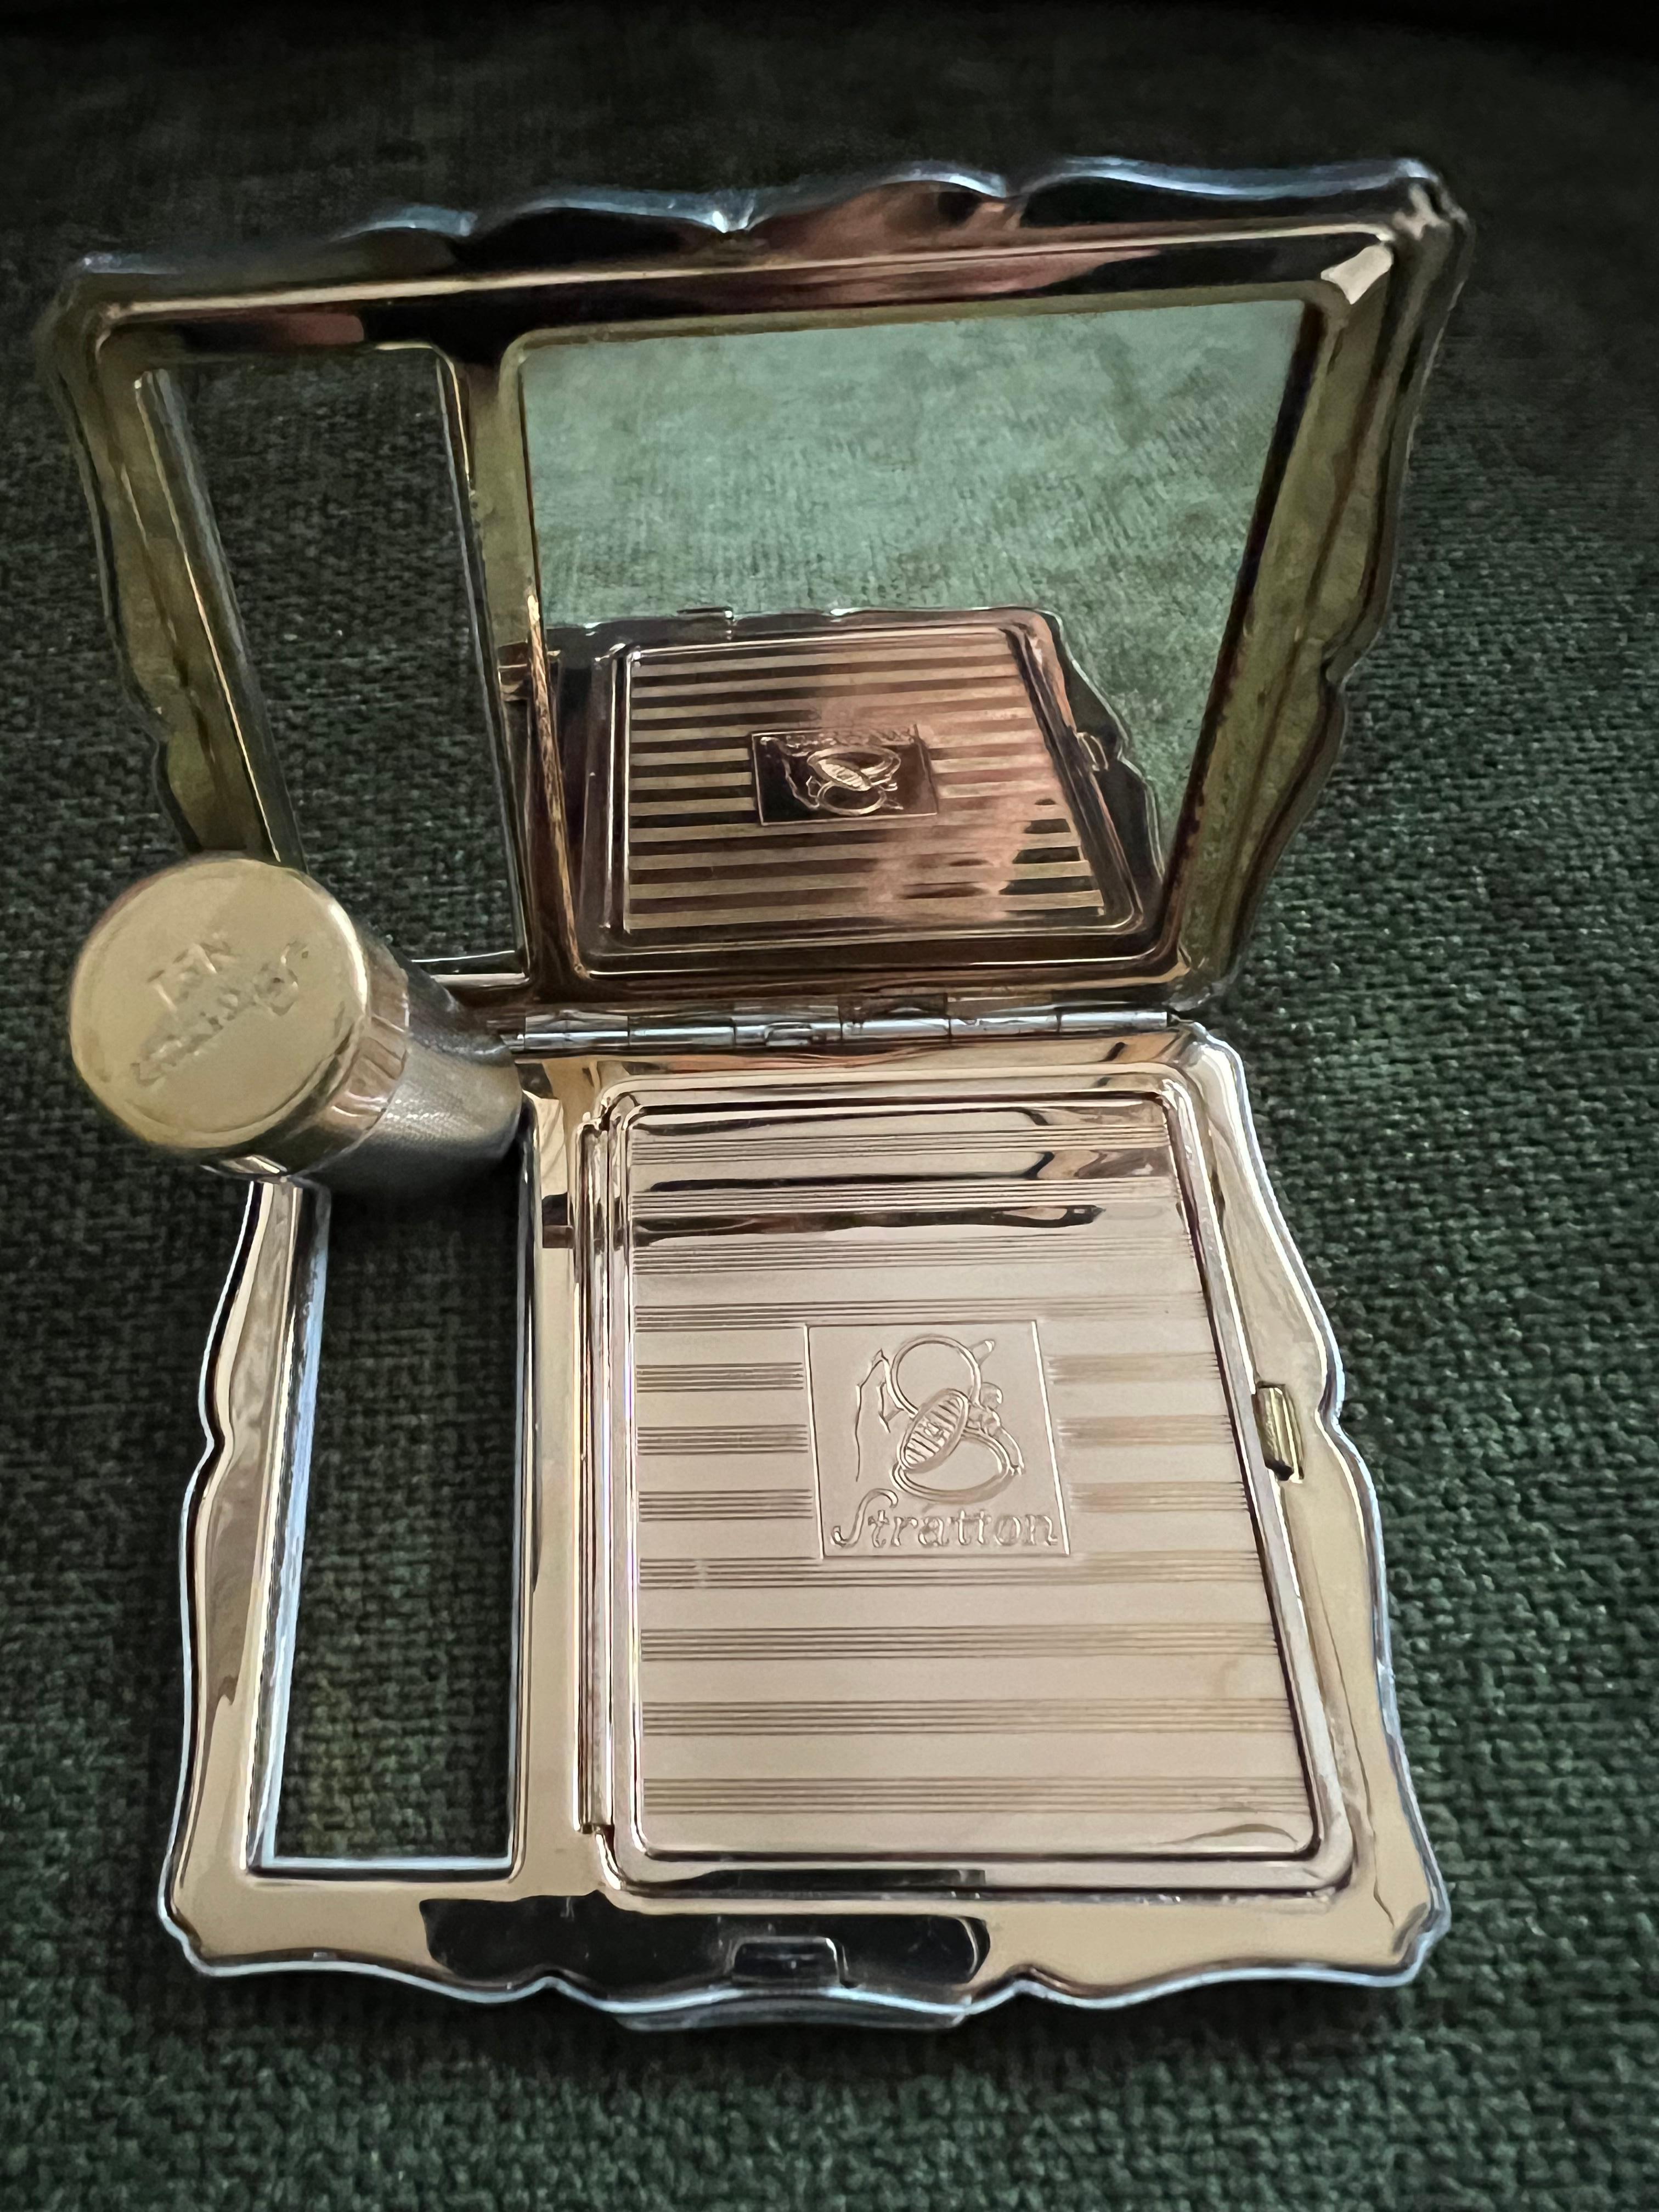 Vintage “Straron” No1 Powder Case with Mirror and Lipstick Holder Case For Sale 2